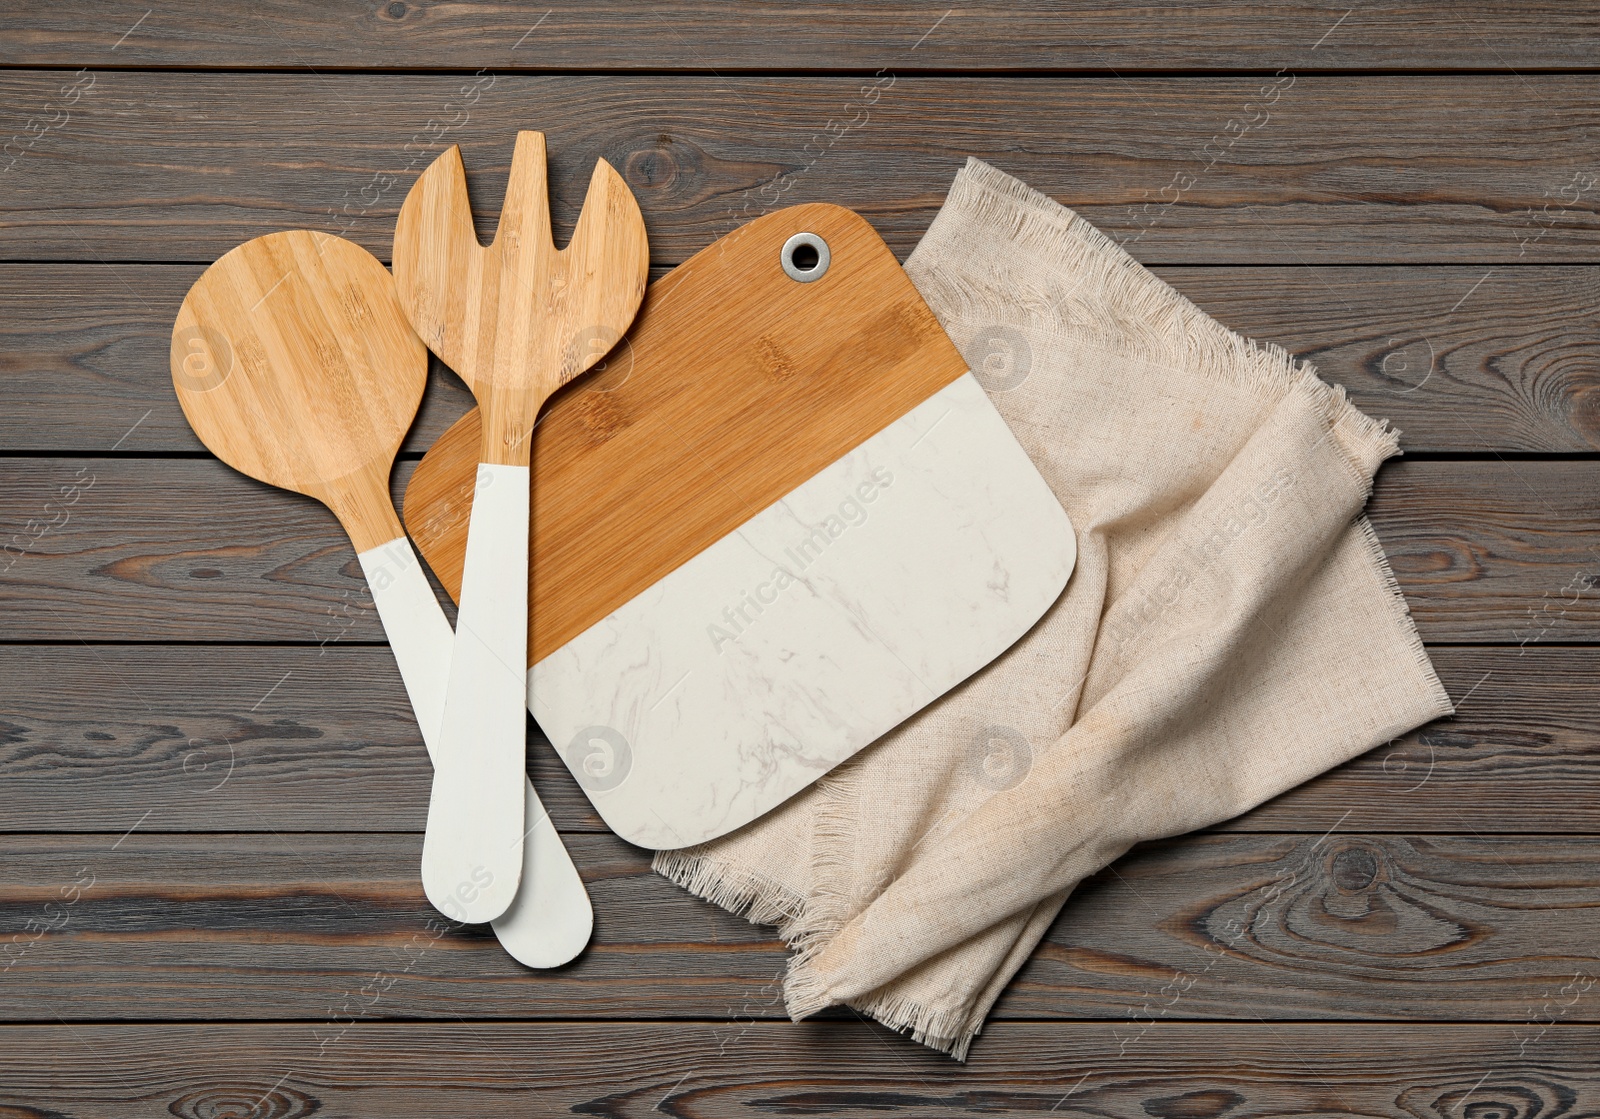 Photo of Set of modern cooking utensils on wooden table, flat lay